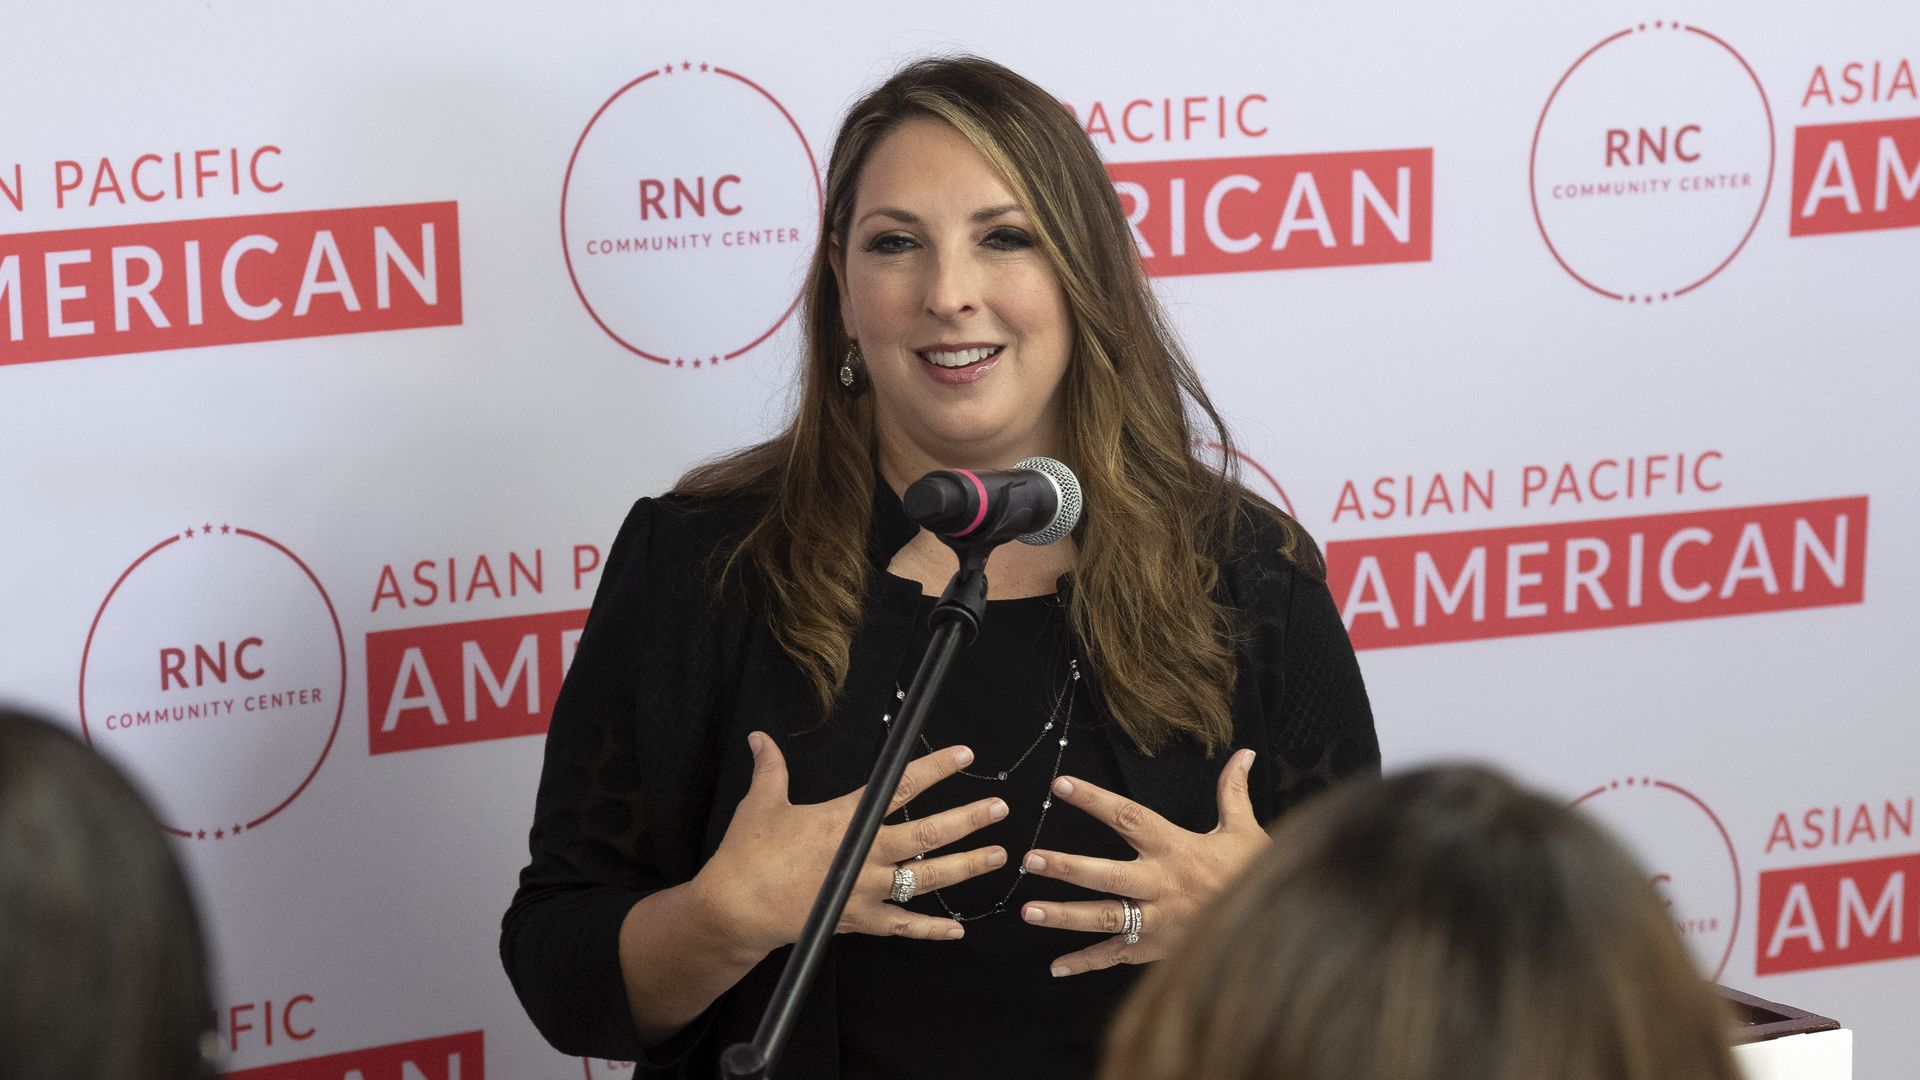 Republican National Committee Chairwoman Ronna McDaniel speaks during the opening of an Asian Pacific American Community Center in Westminster, CA on Friday, June 25, 2021. 